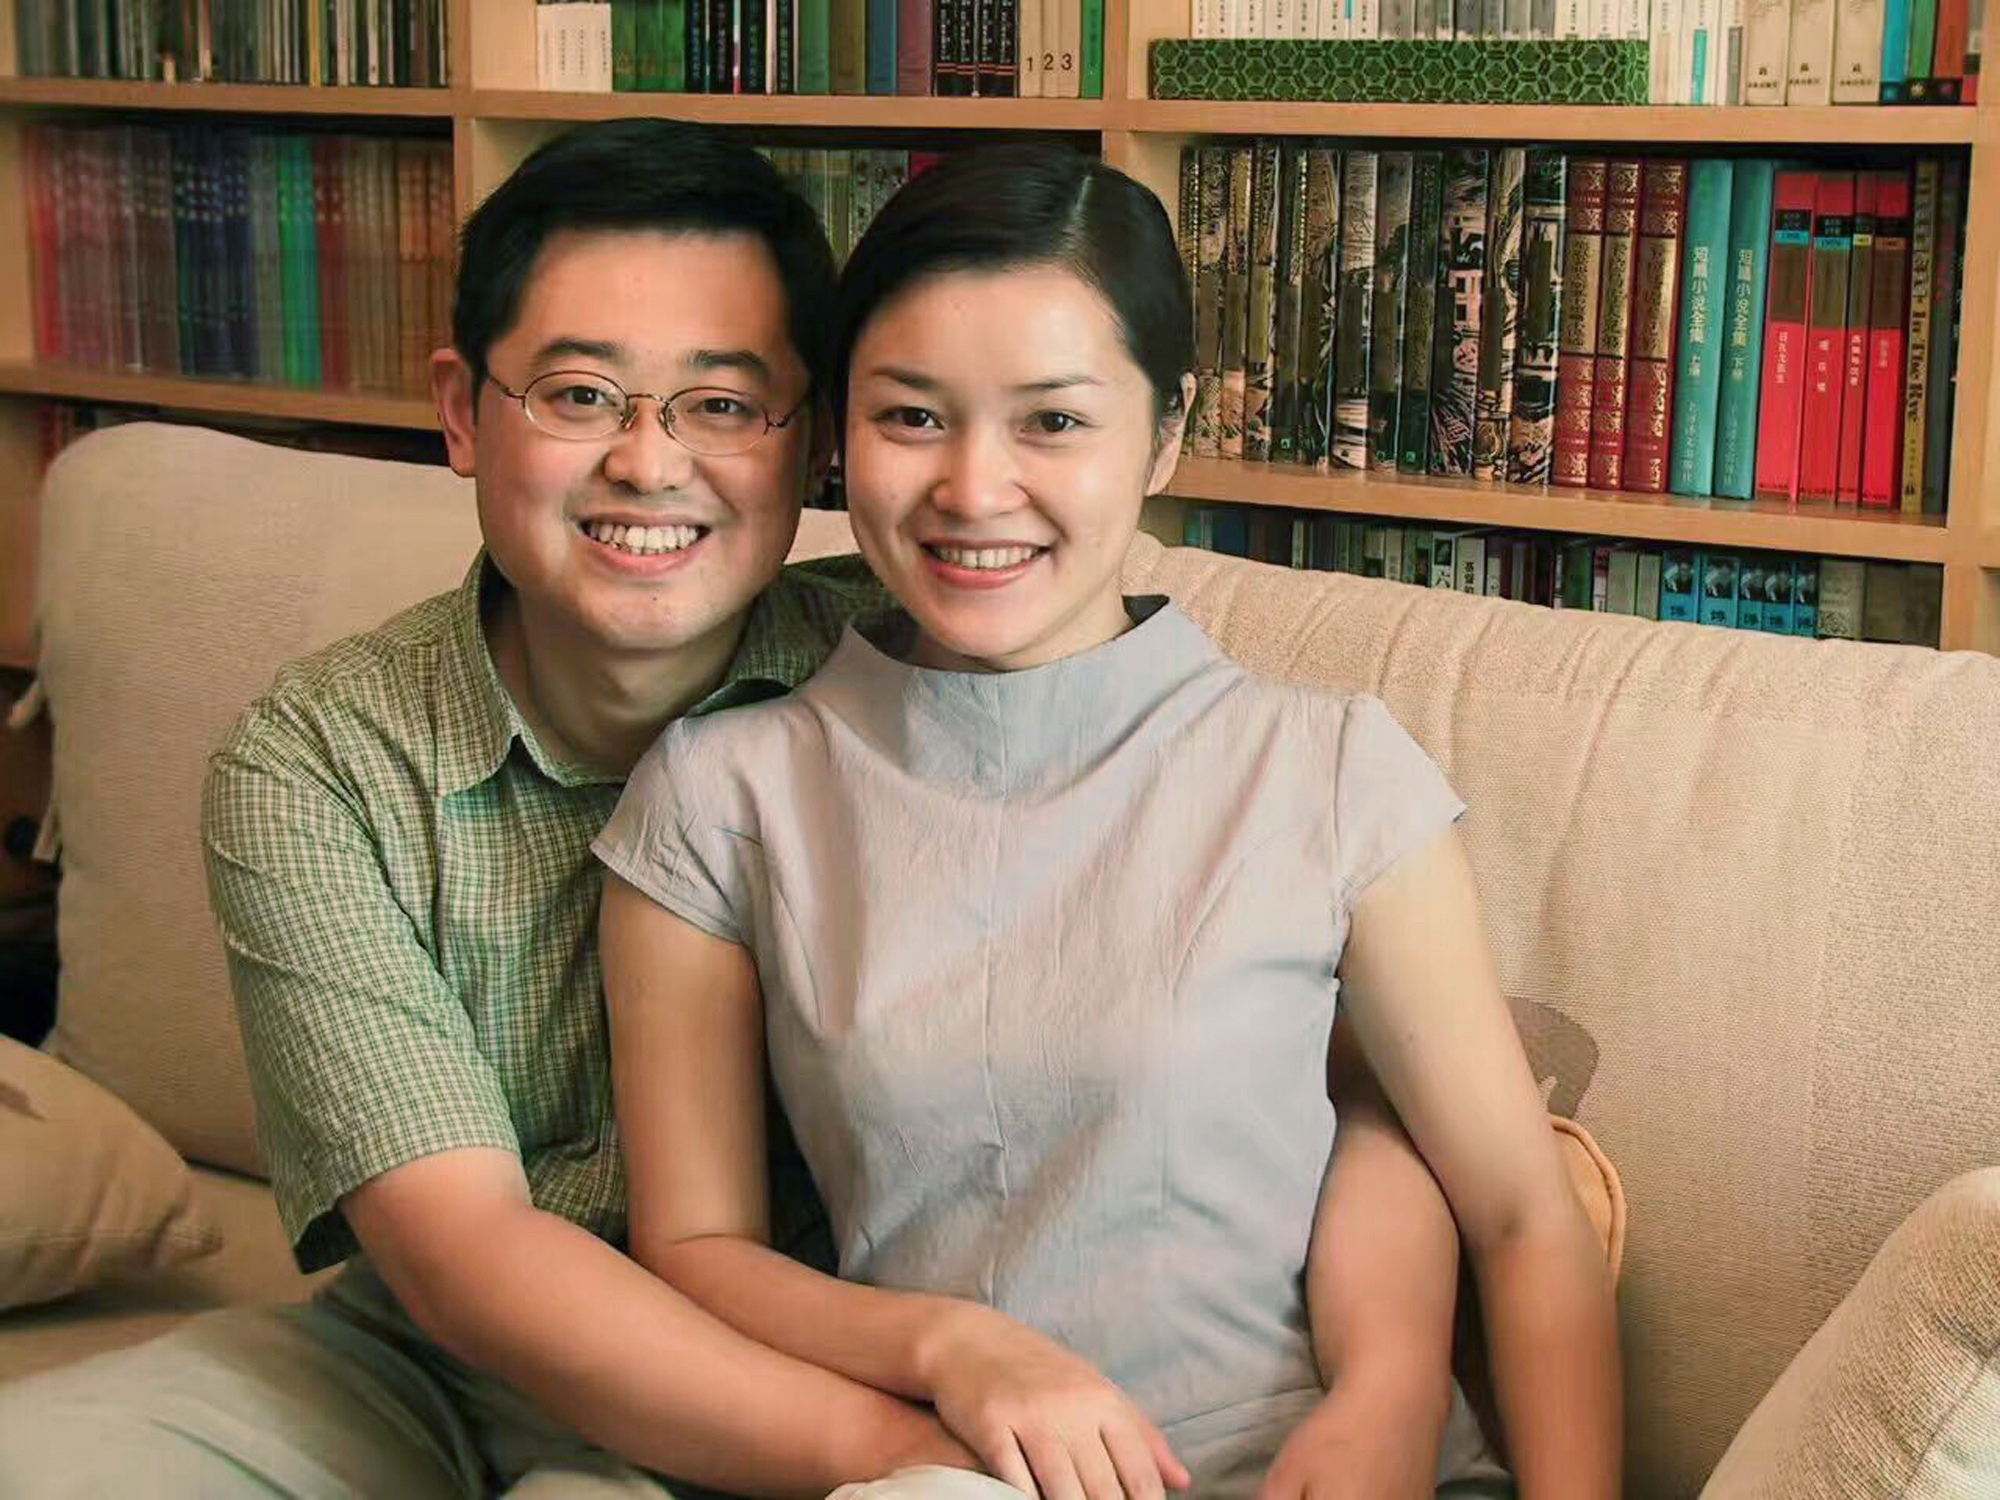 In this 2000 photo provided by ChinaAid, pastor Wang Yi, left, poses with his wife Jiang Rong at the study room of their home in Chengdu, China. (ChinaAid/AP)